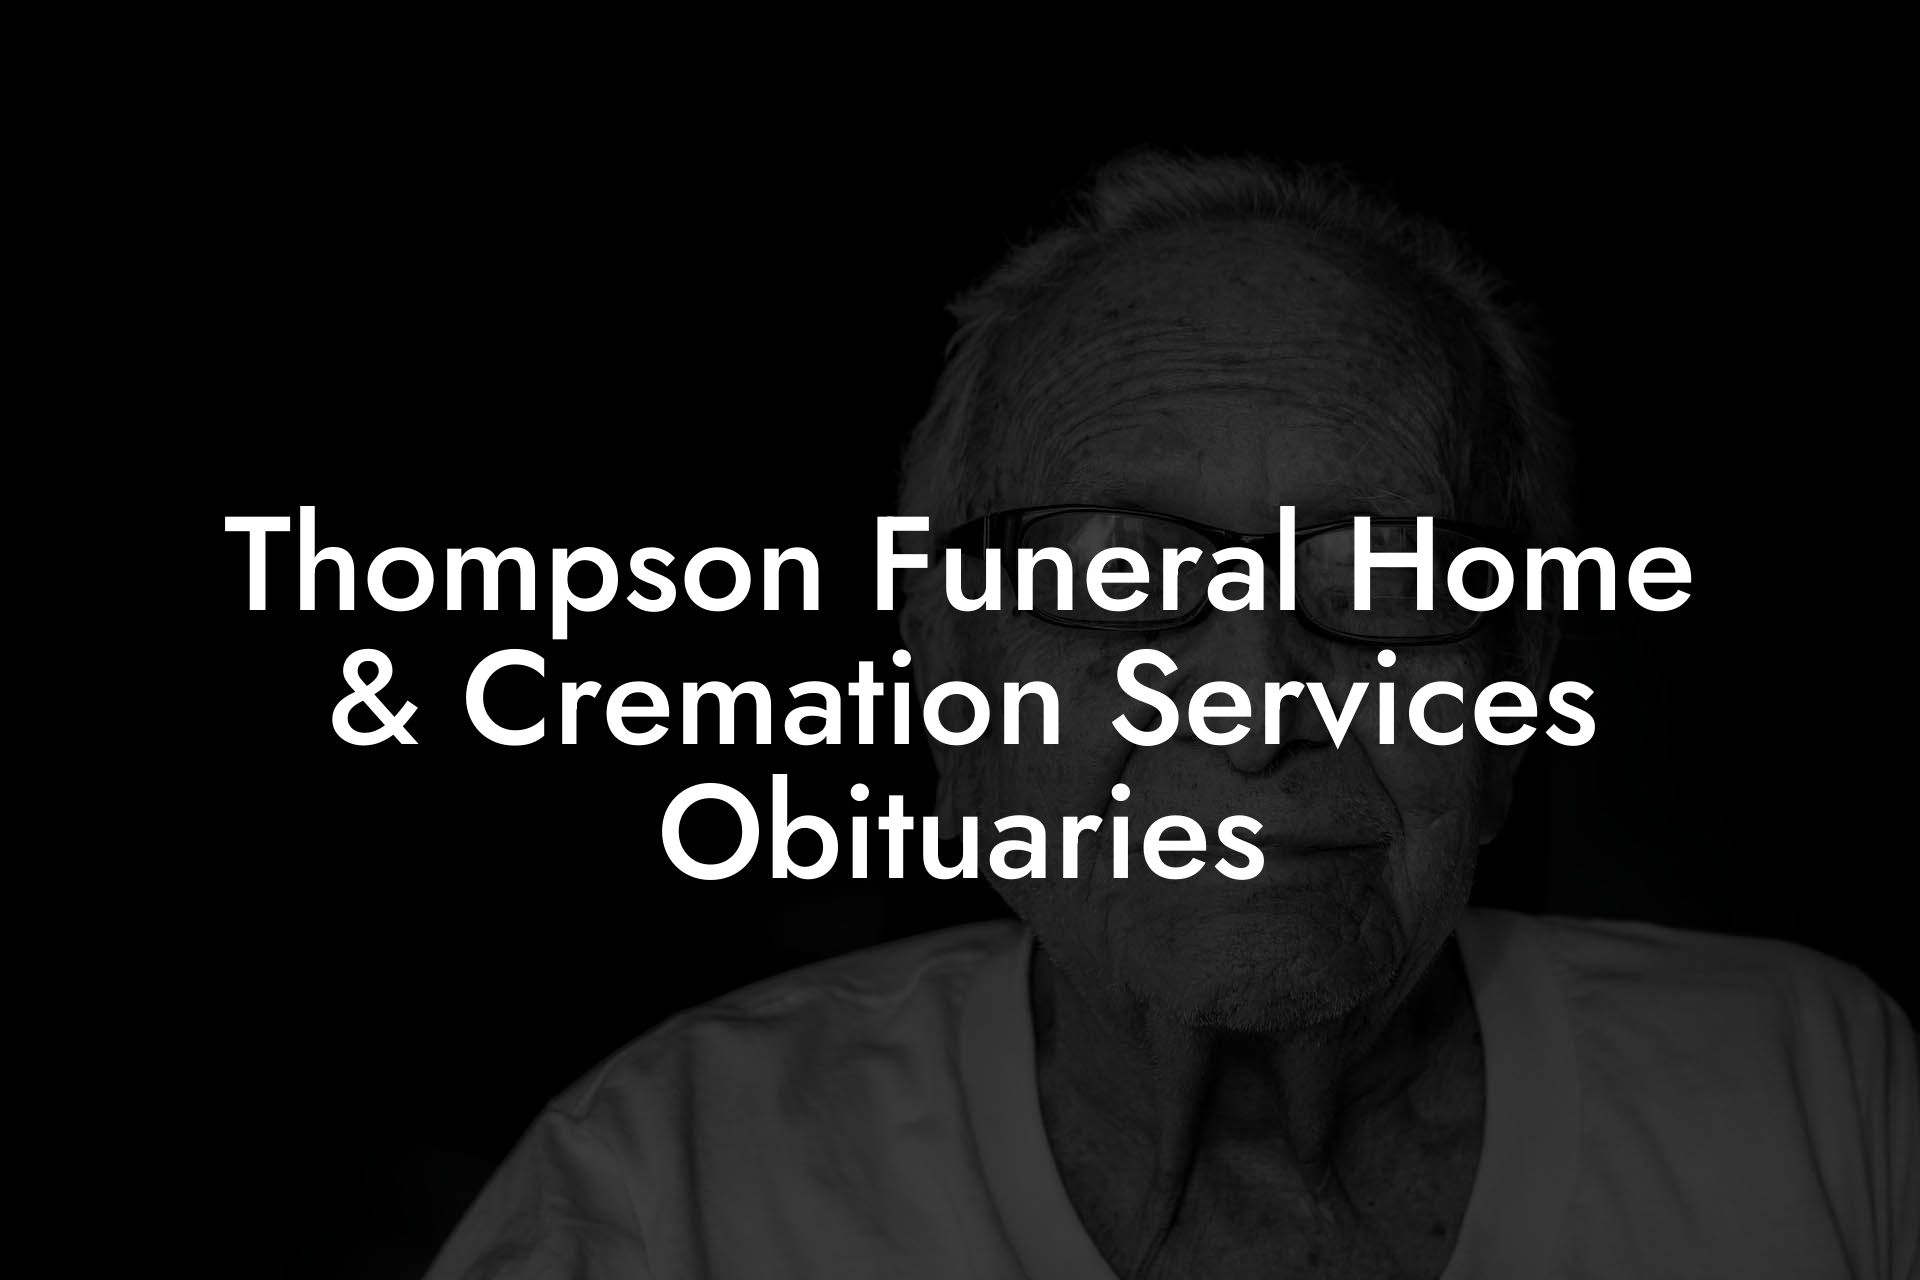 Thompson Funeral Home & Cremation Services Obituaries